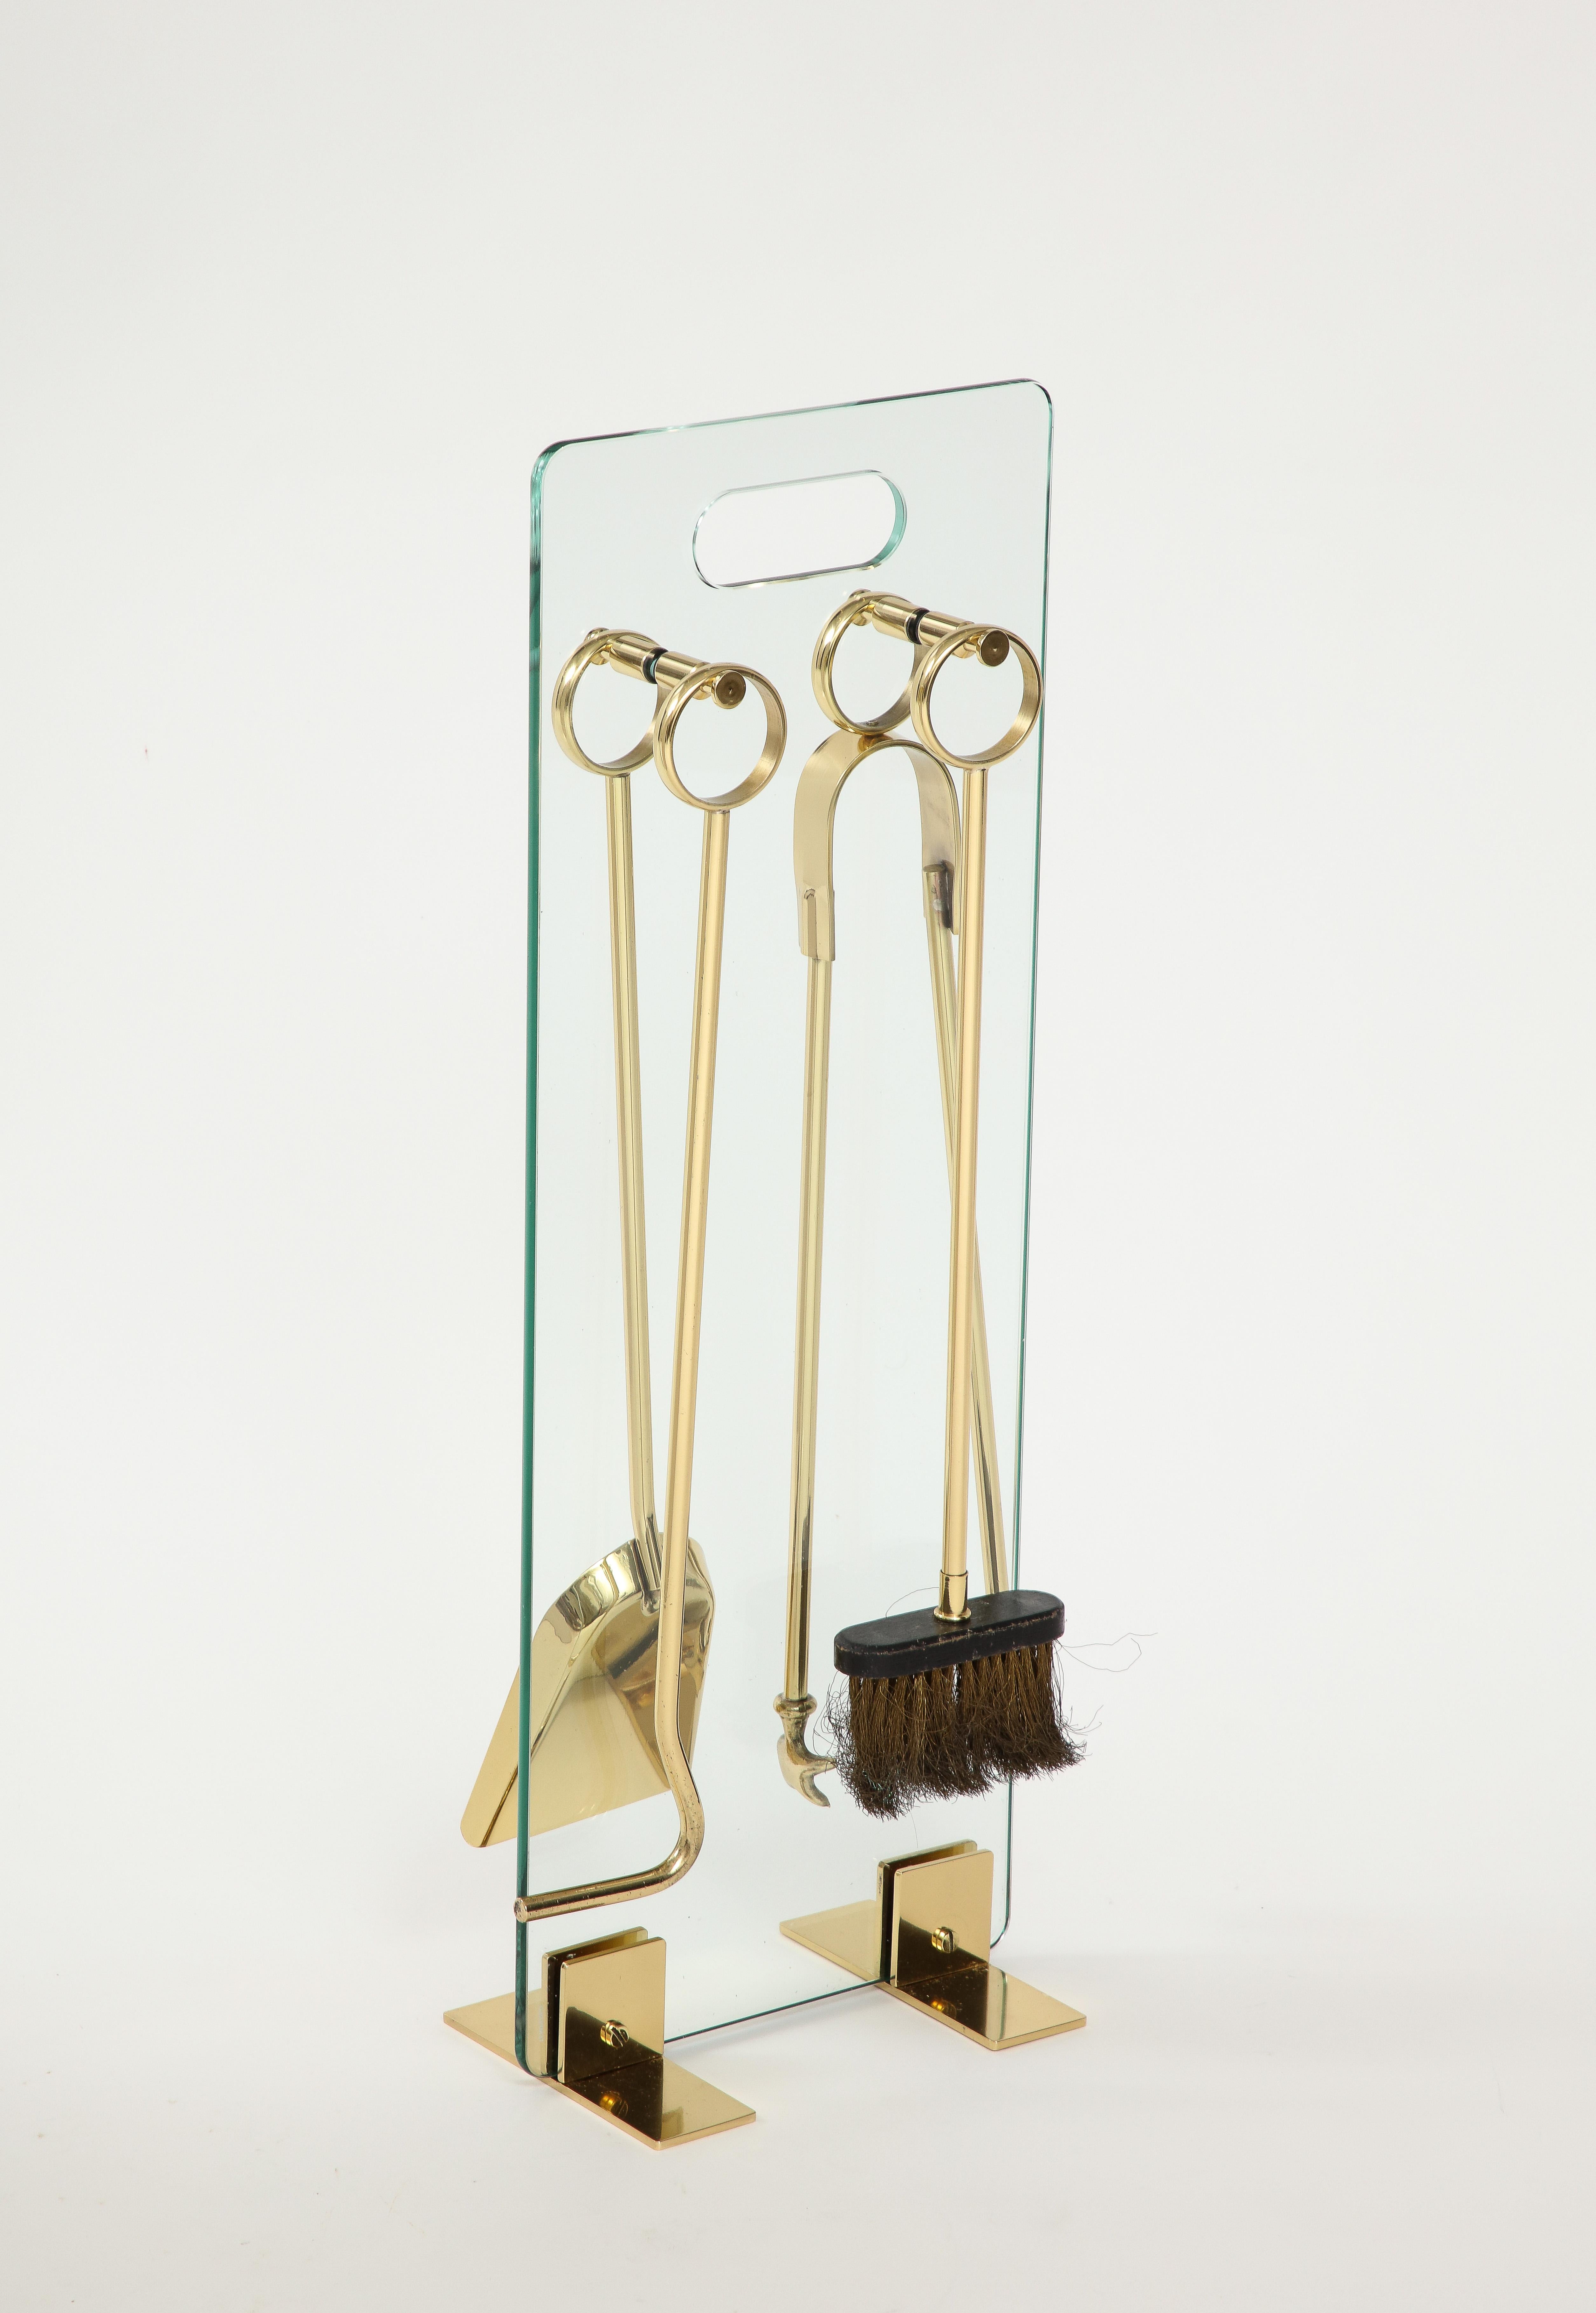 French Modernist set of brass fire tools suspended on a glass frame, in the style of Jacques Adnet. Professionally polished.